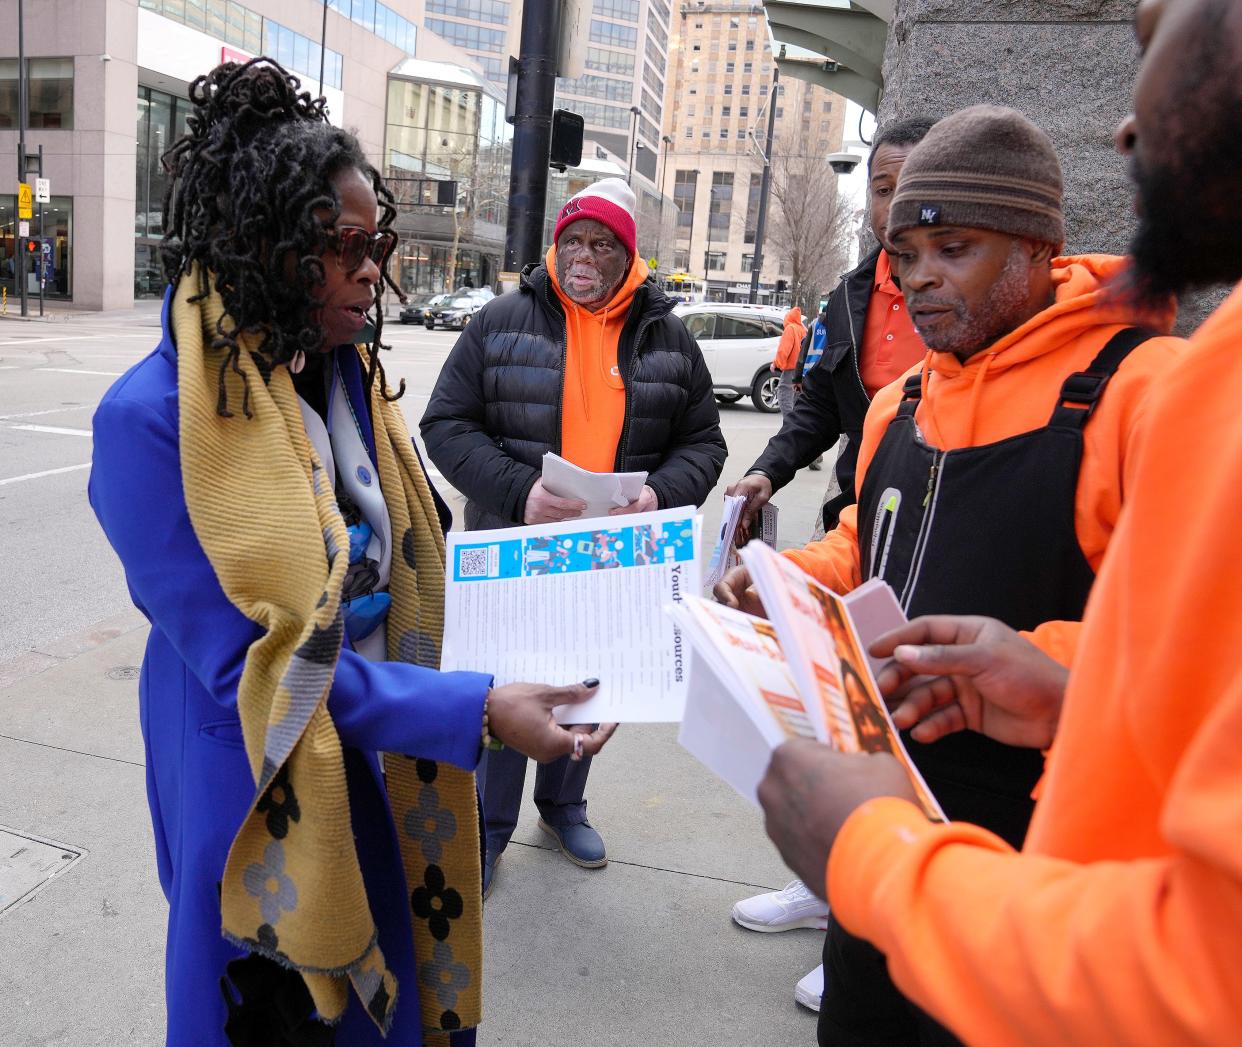 Community activist Iris Roley speaks with members of the Urban League's Community Partnering Center before handing out information to teens at Government Square. The outreach effort followed two two assaults committed by groups of teens that were captured by surveillance video.